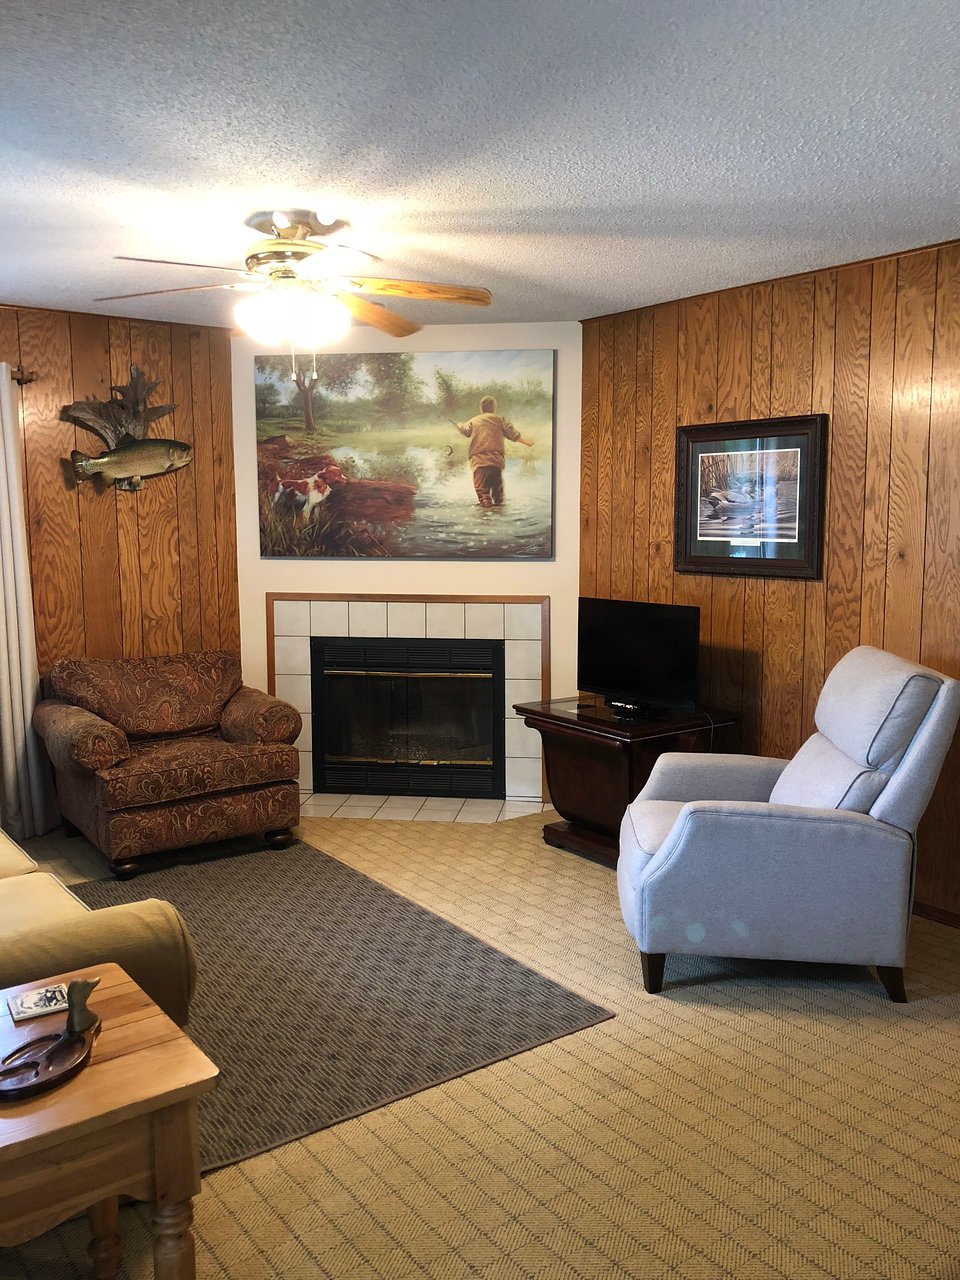 Fireplaces Unlimited Best Of Lakeshore Resort Updated 2019 Prices Reviews & S